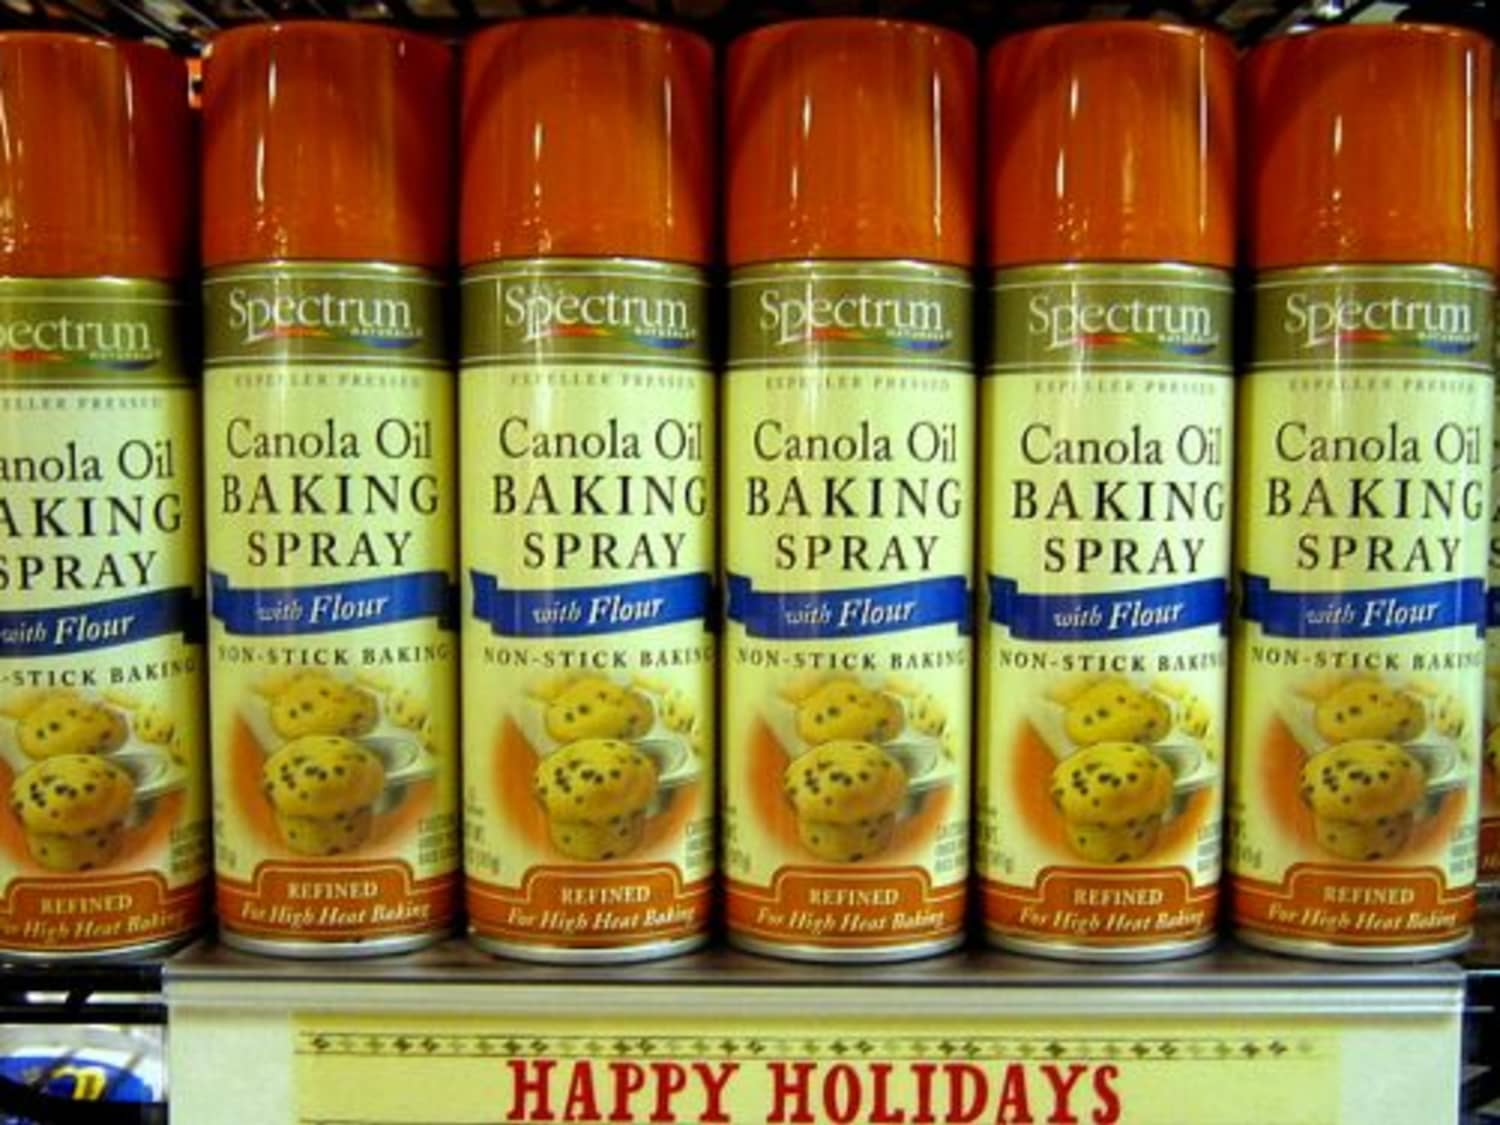 Look! Natural Cooking Spray (with Flour!) at Whole Foods